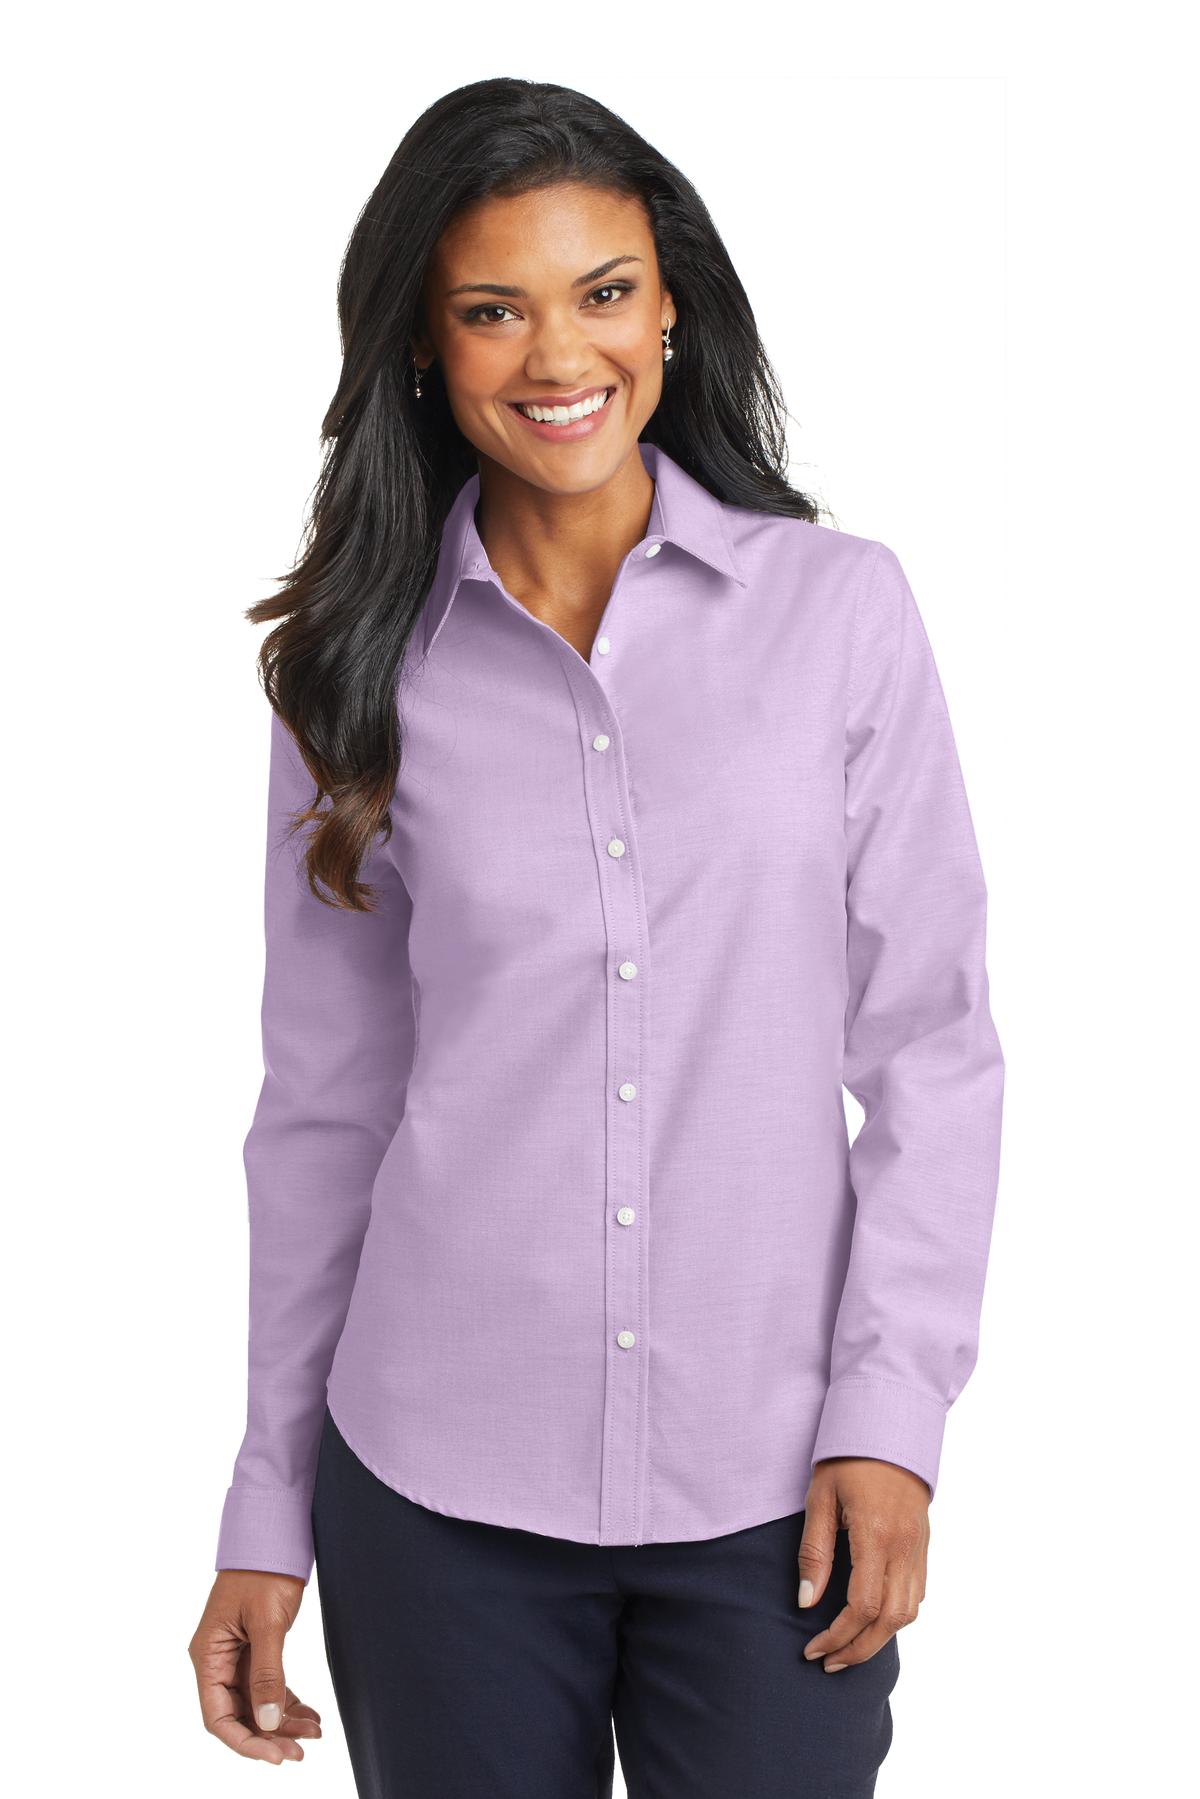 click to view Soft Purple